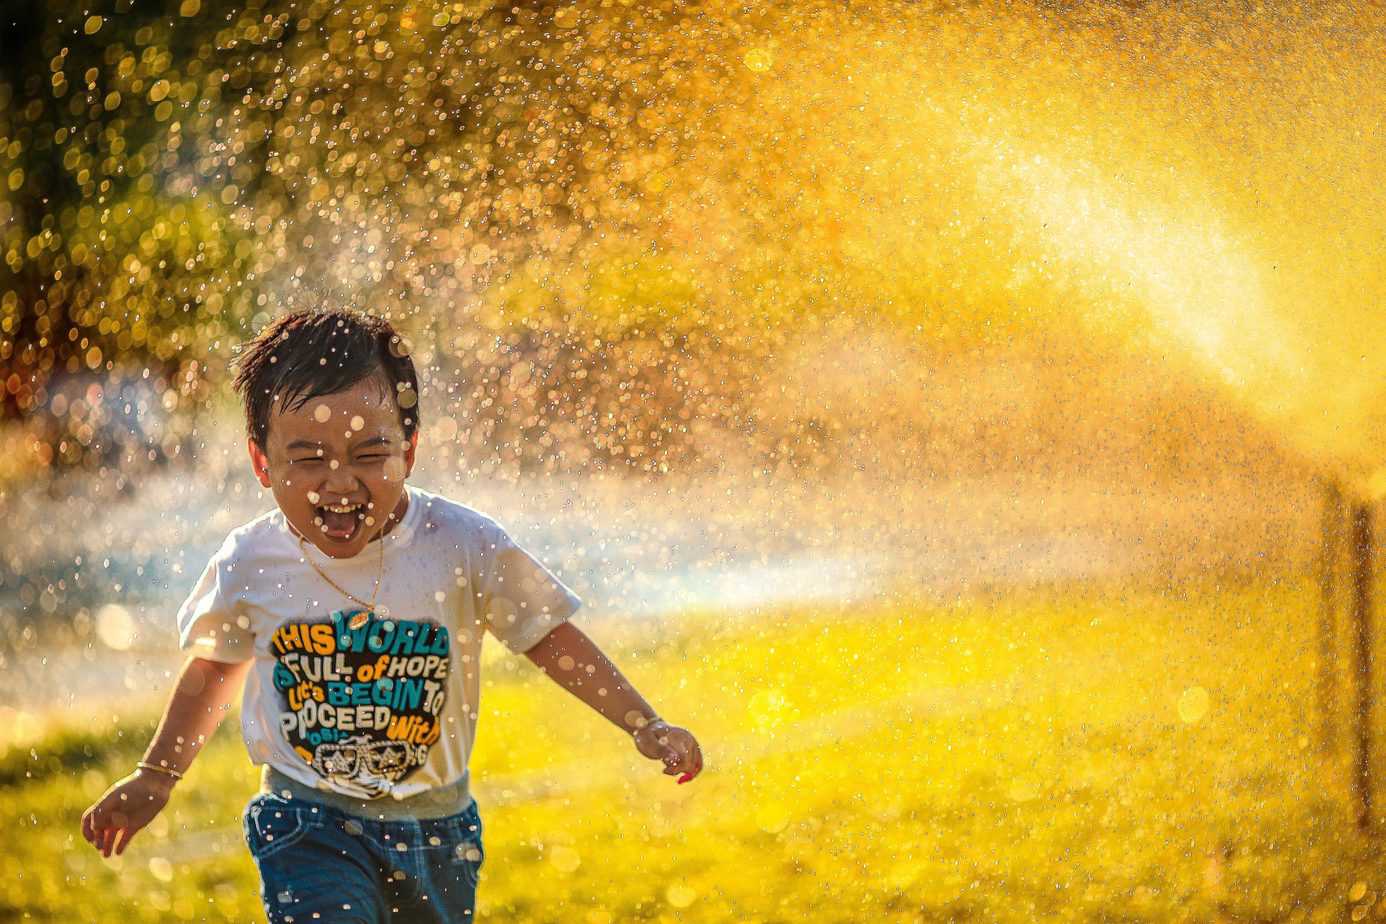 A picture of a kid running happily in the rain.